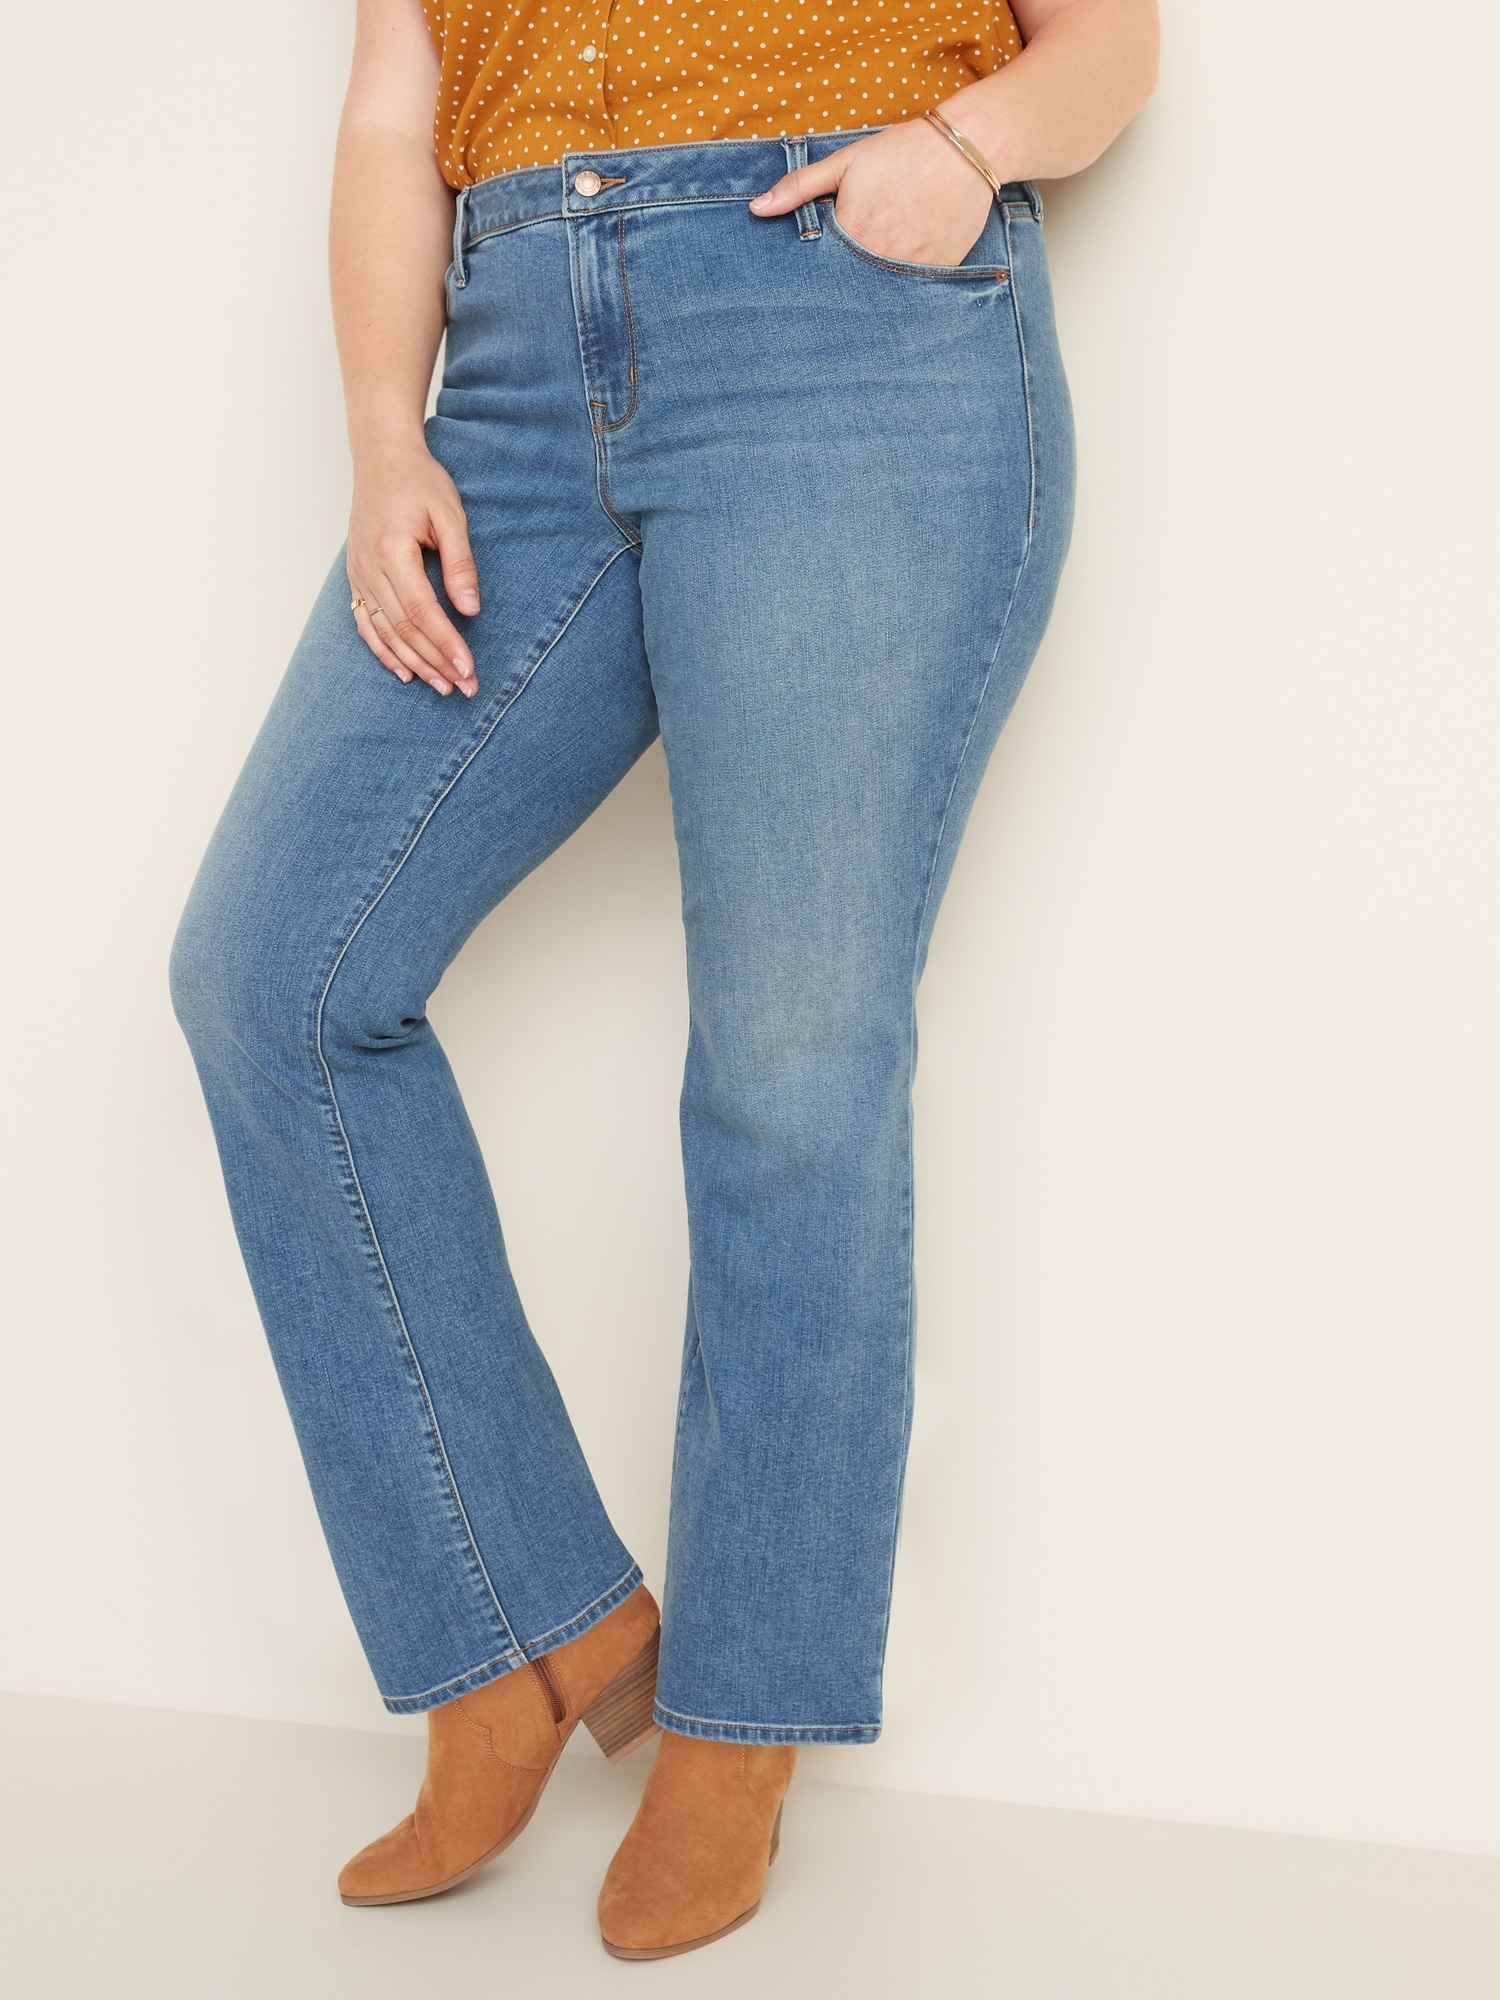 old navy curvy jeans size chart